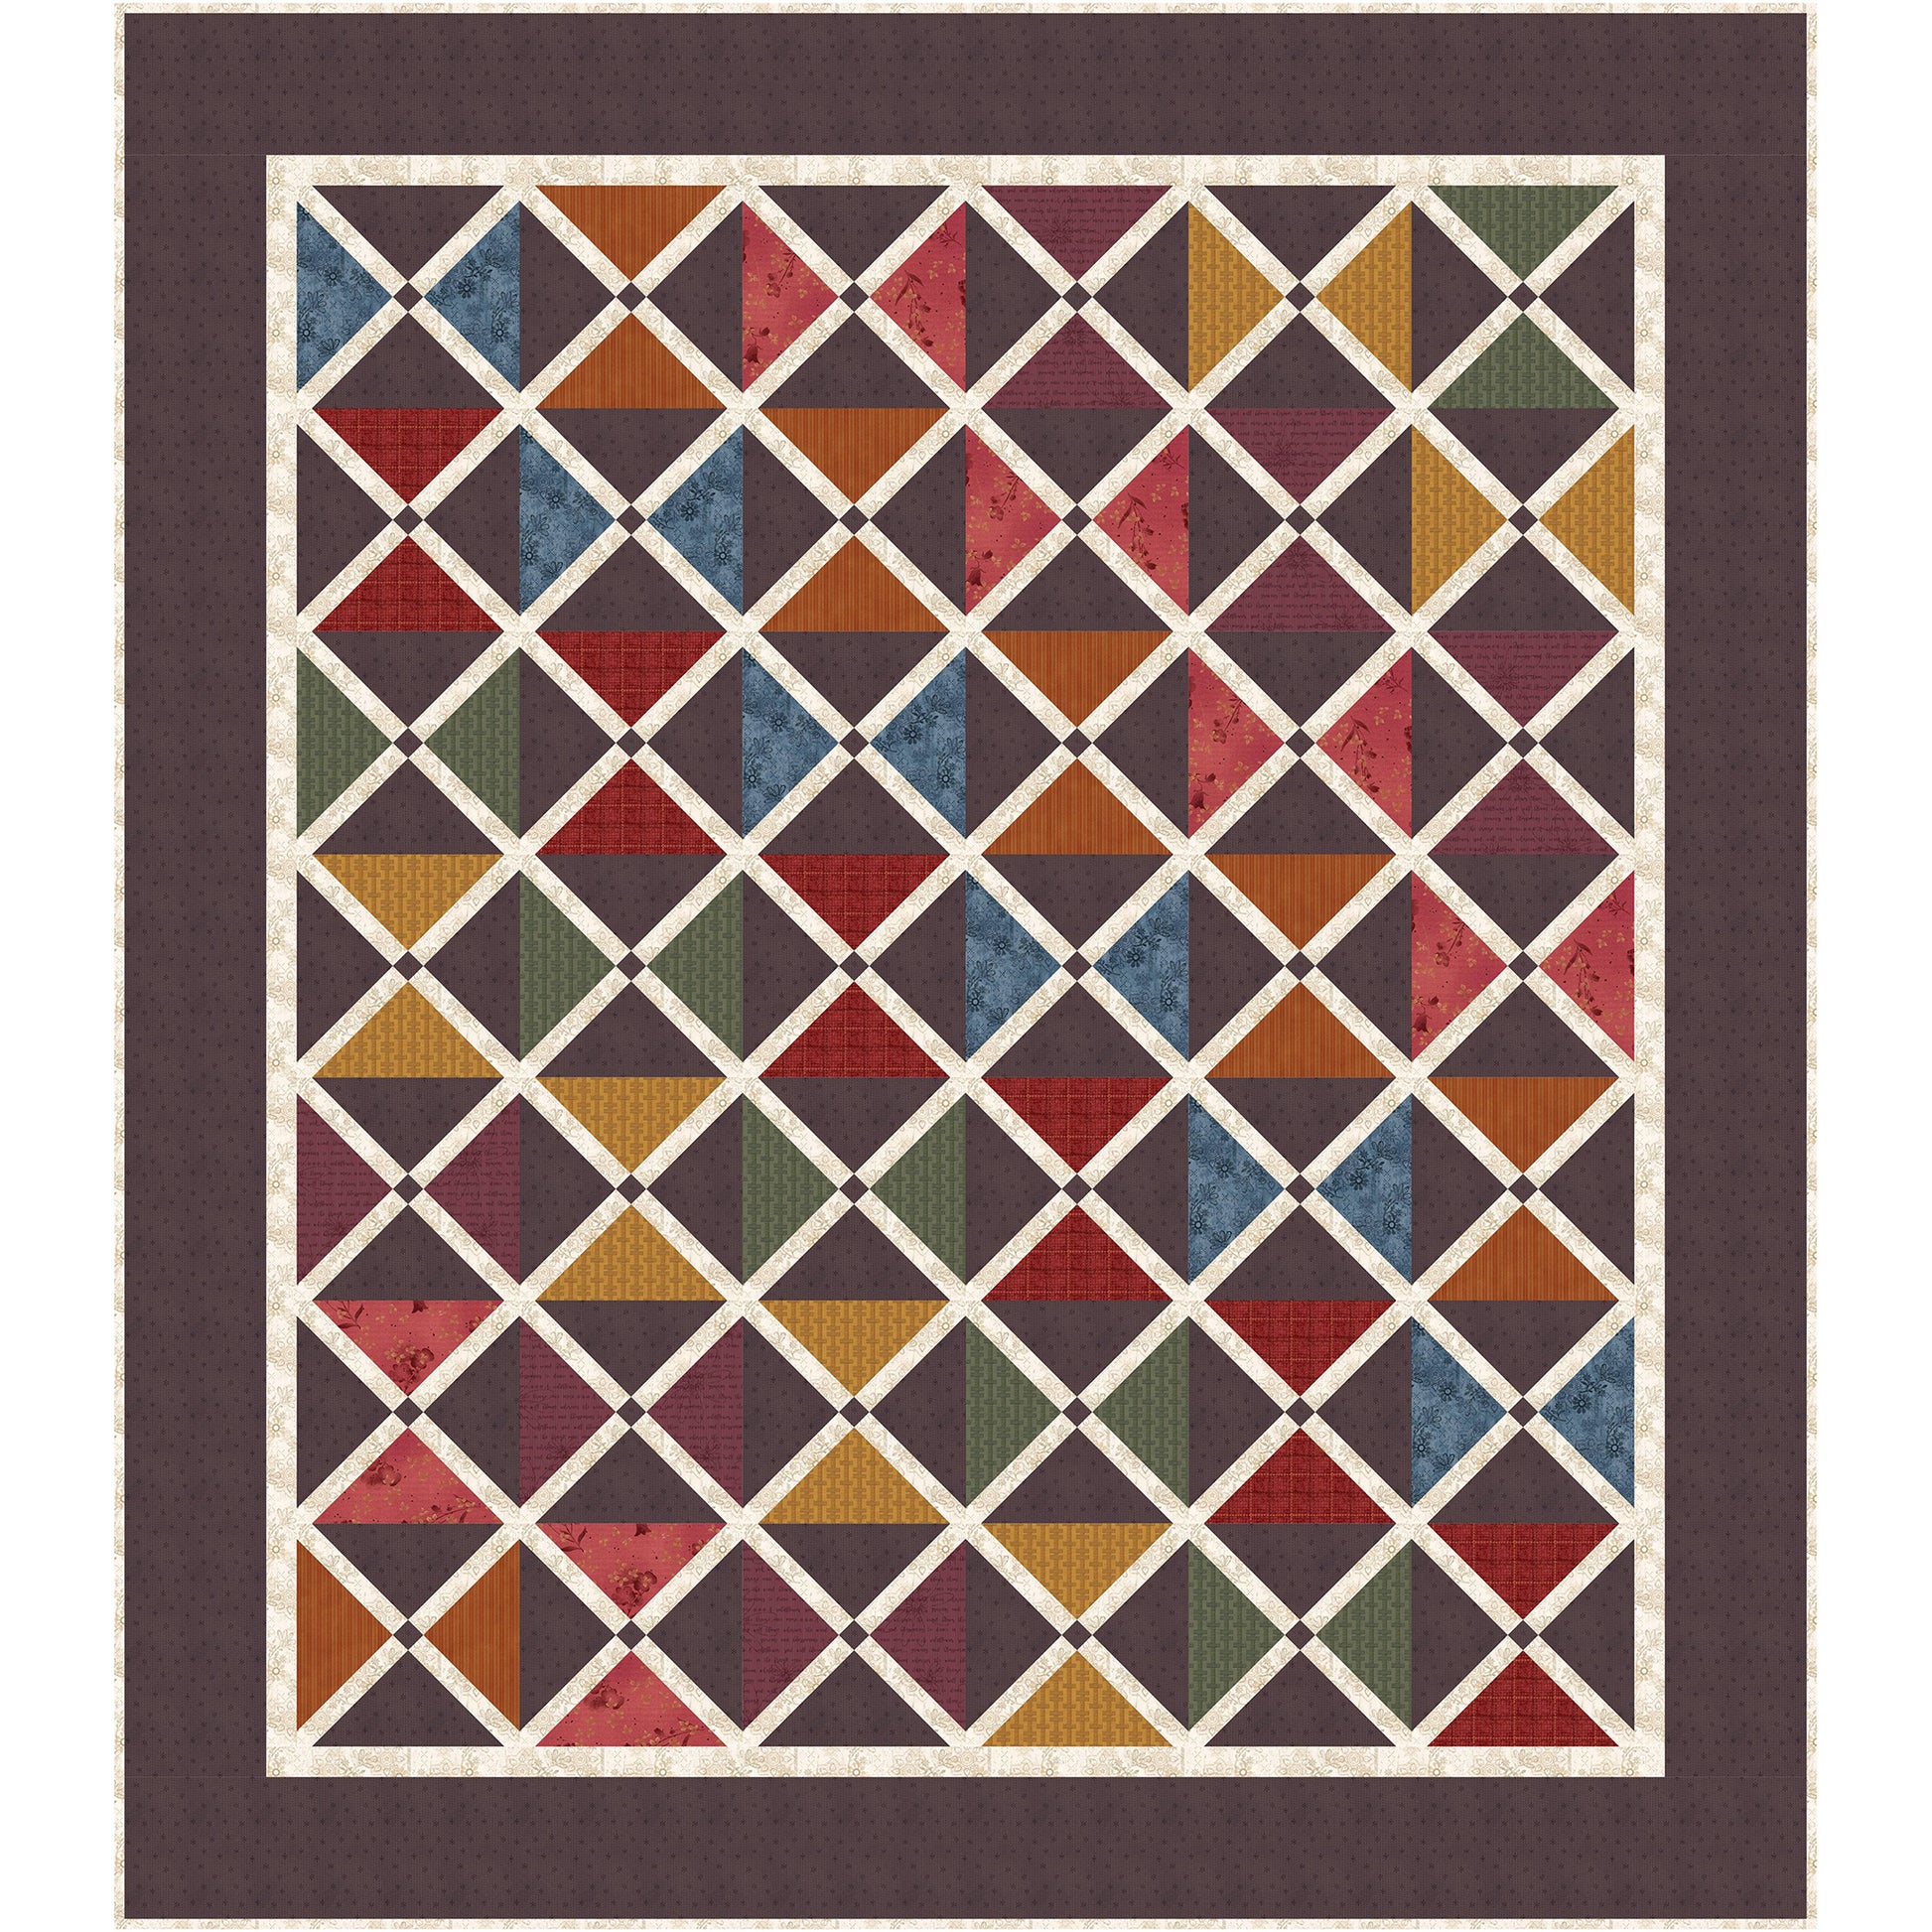 Colorful geometric quilt has an elegant or masculine feel.